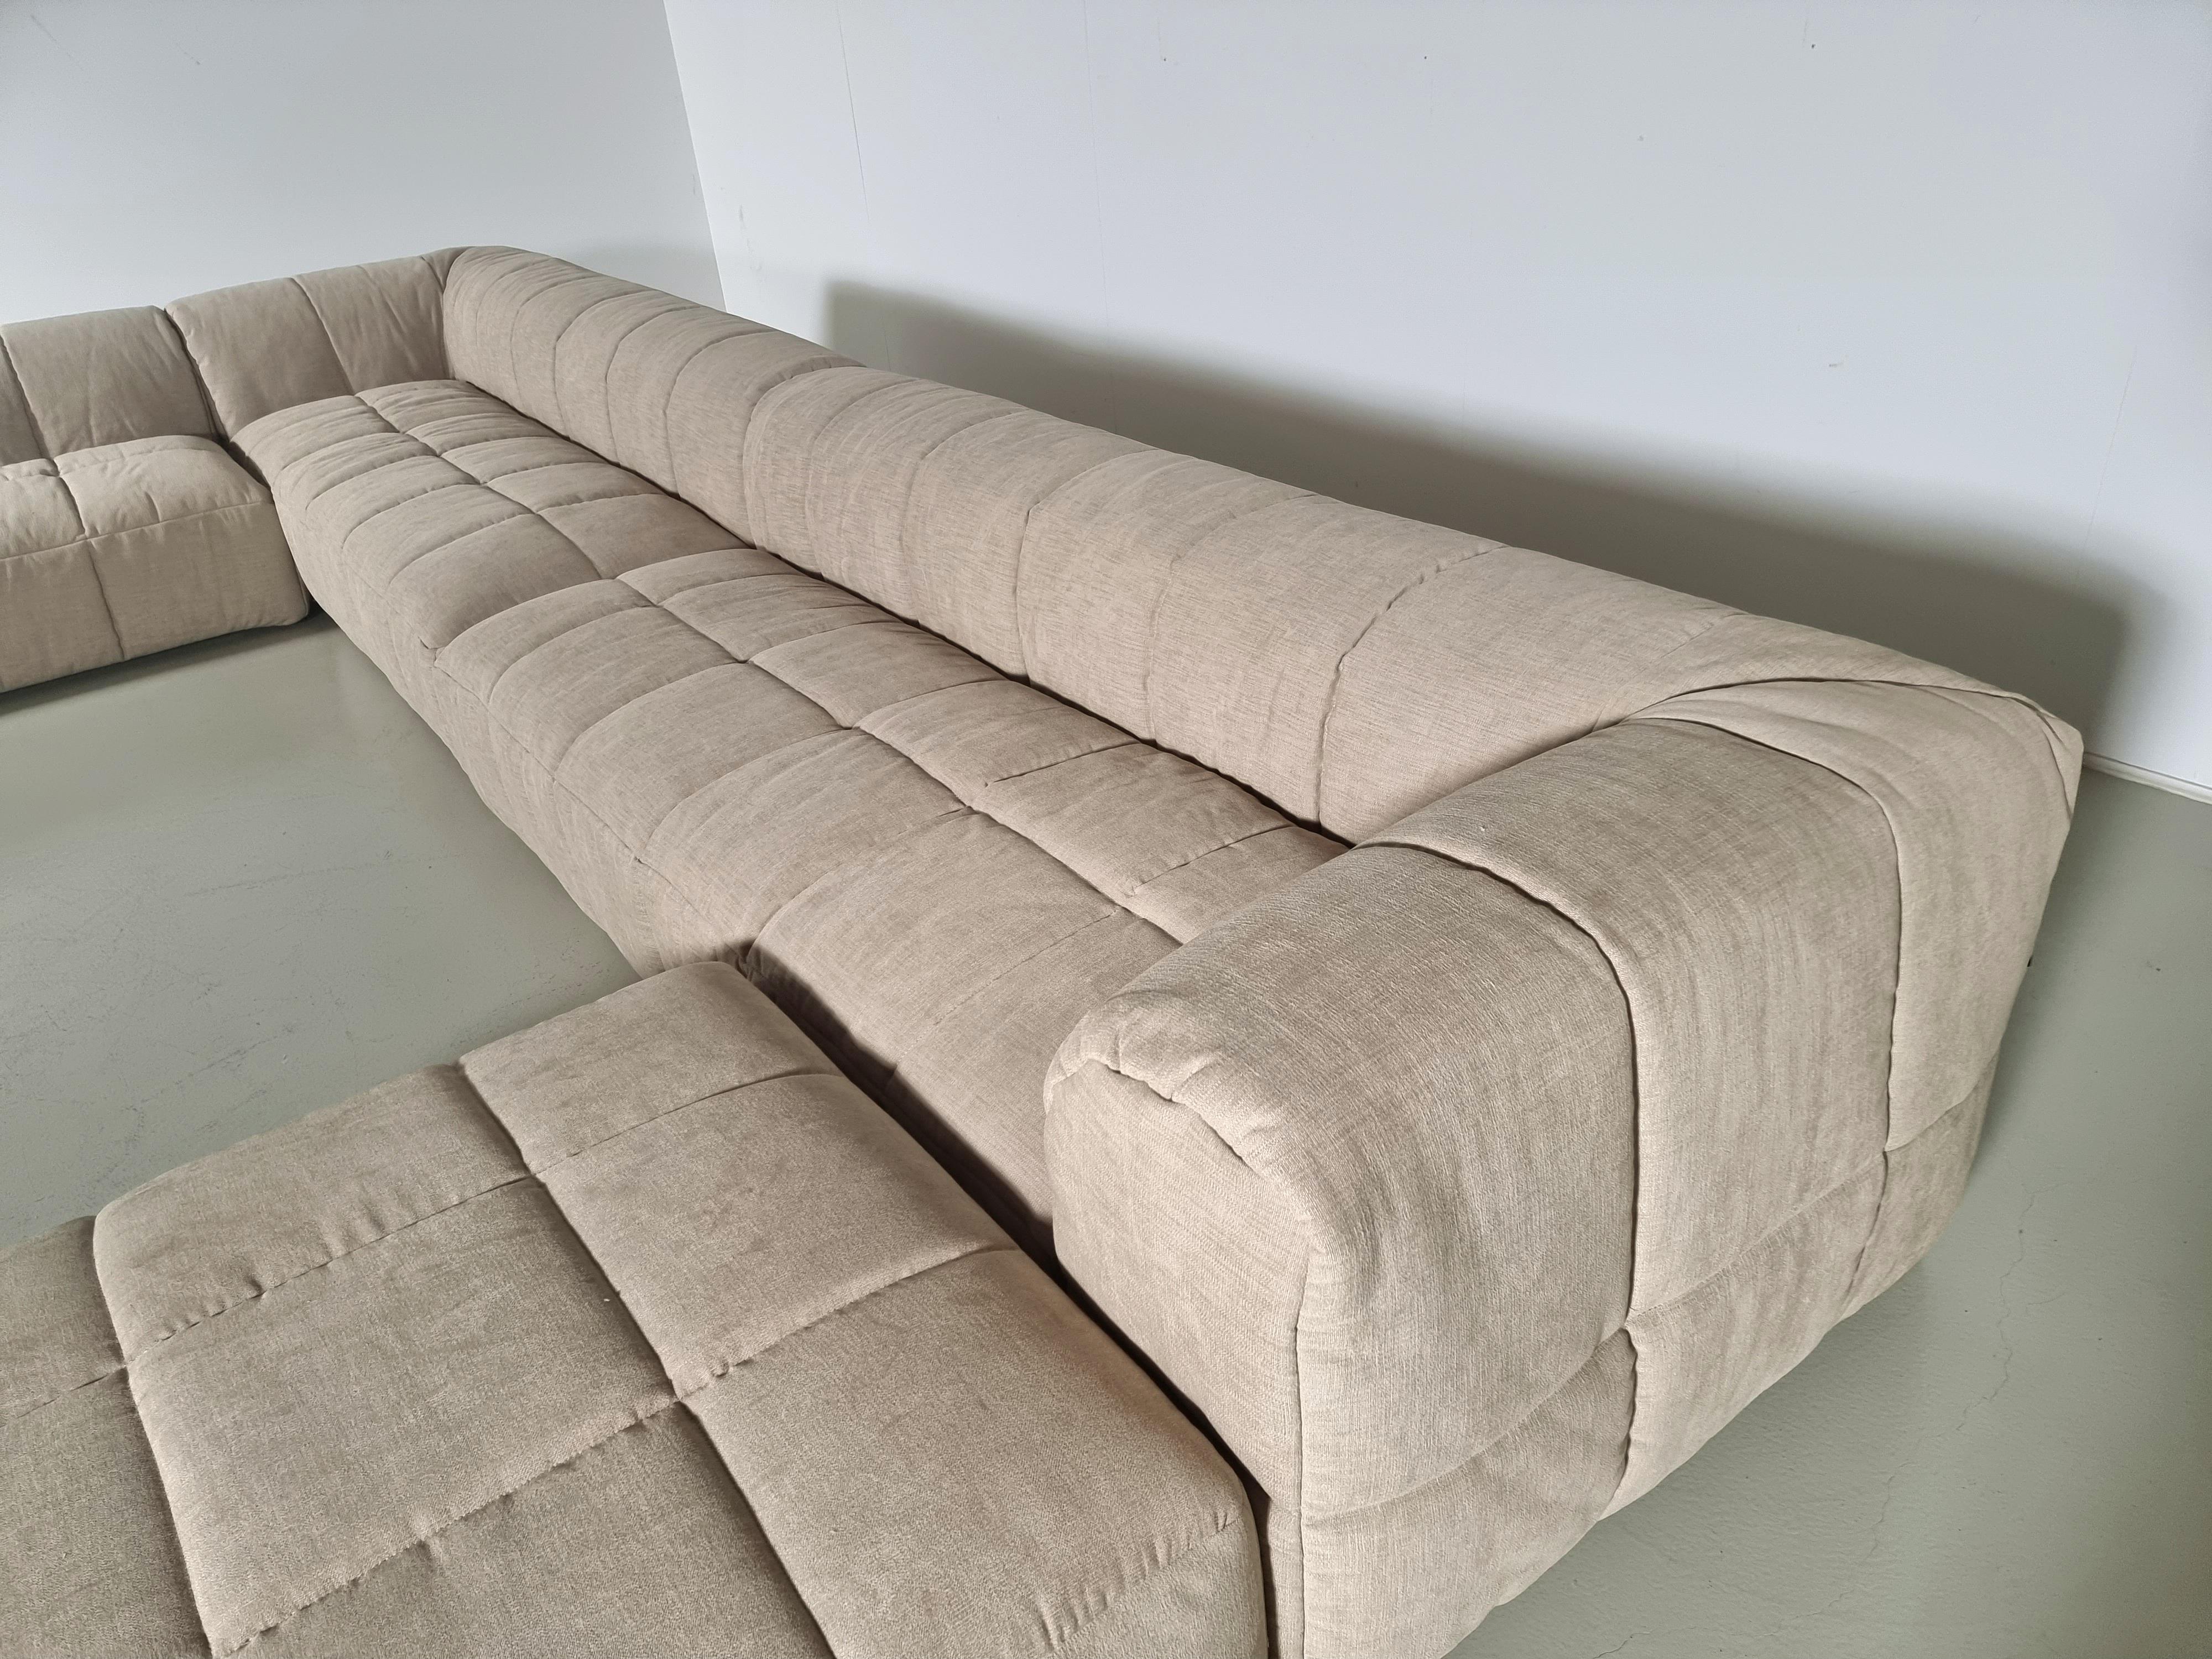 Late 20th Century Strips Modular Sofa in cream stain resistant fabric by Cini Boeri for Arflex For Sale